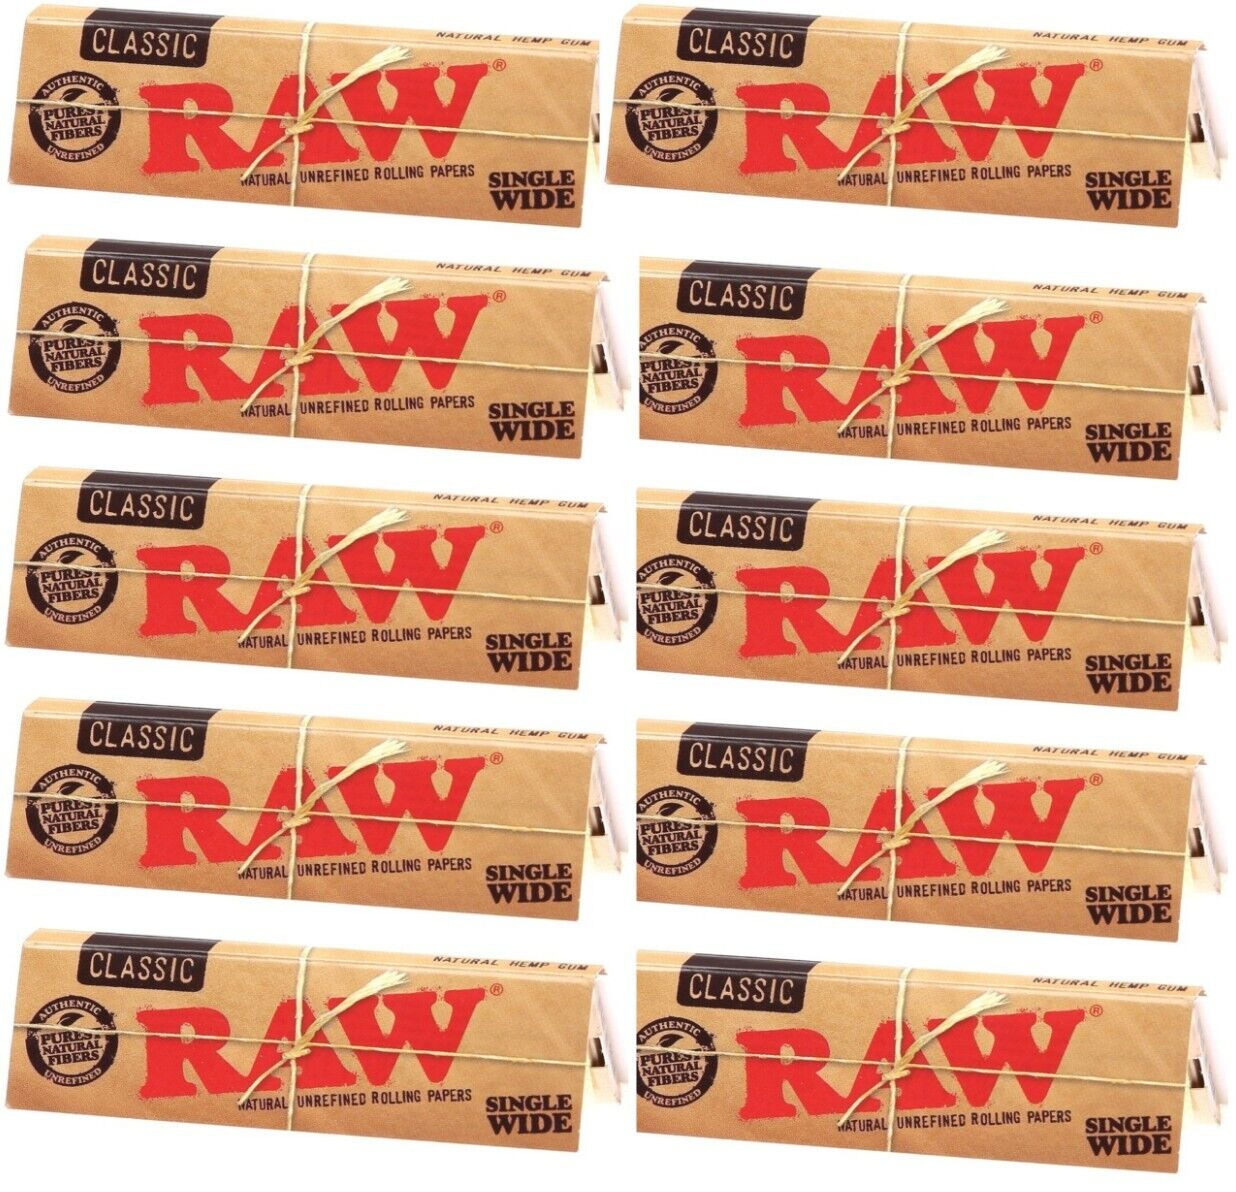 10x Raw Single Wide Classic Rolling Papers 50 LVS/PK 10 Packs FREE USA SHIPPING